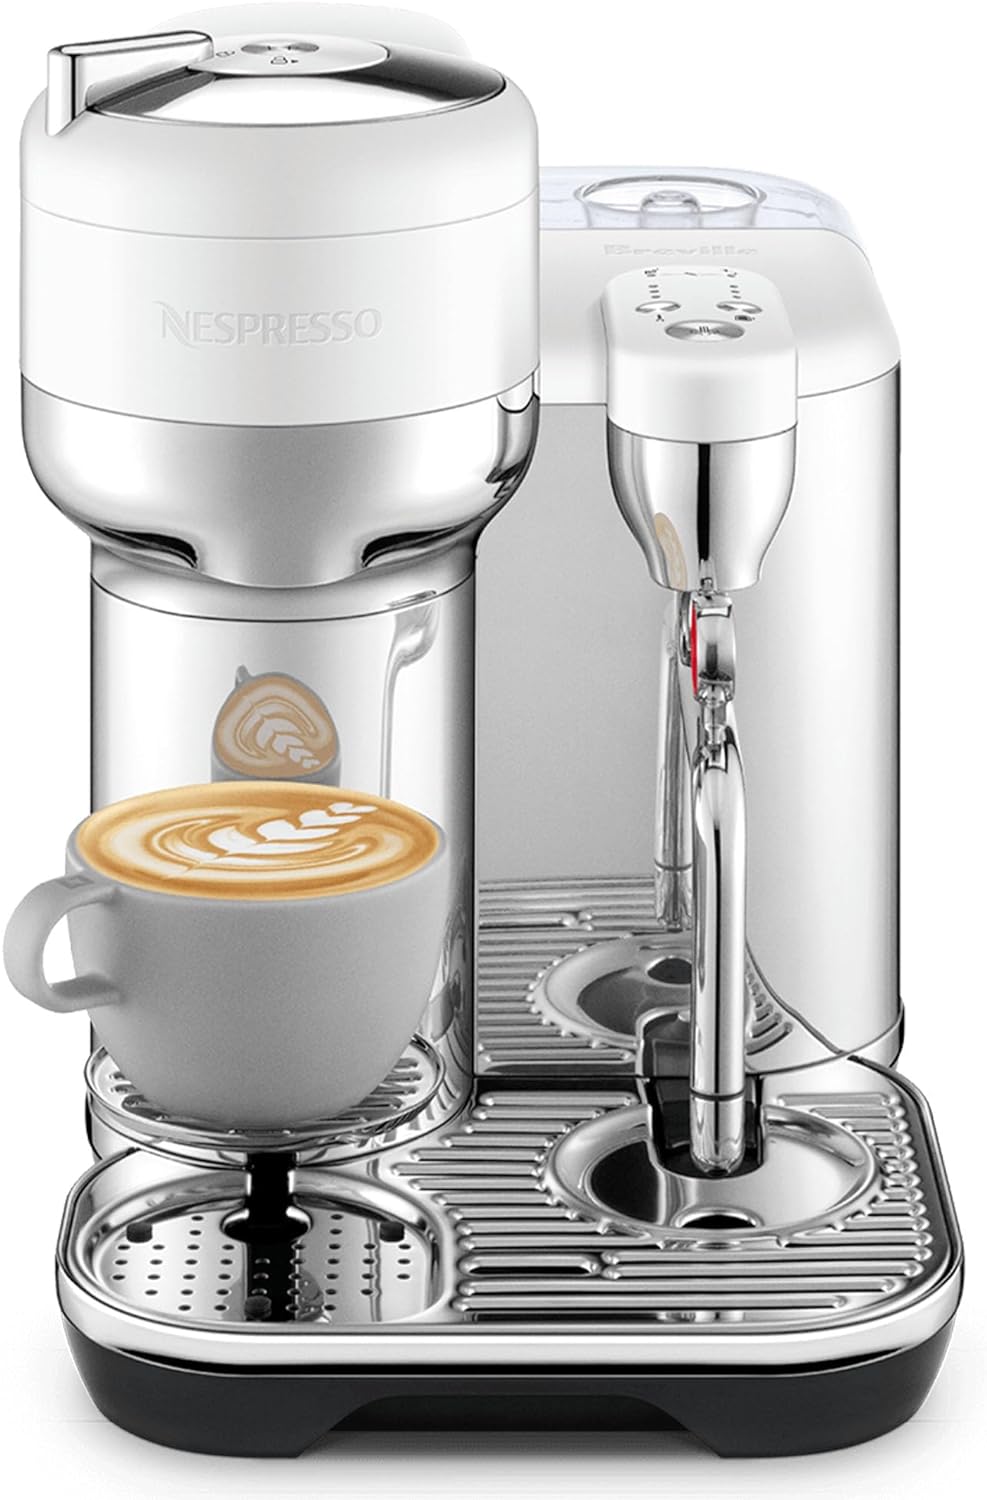 Nespresso Vertuo Creatista Automatic Pod Coffee Machine with Milk Frother Wand for Cappuccino, Flat White and Espresso by Sage, Stainless Steel - Amazing Gadgets Outlet